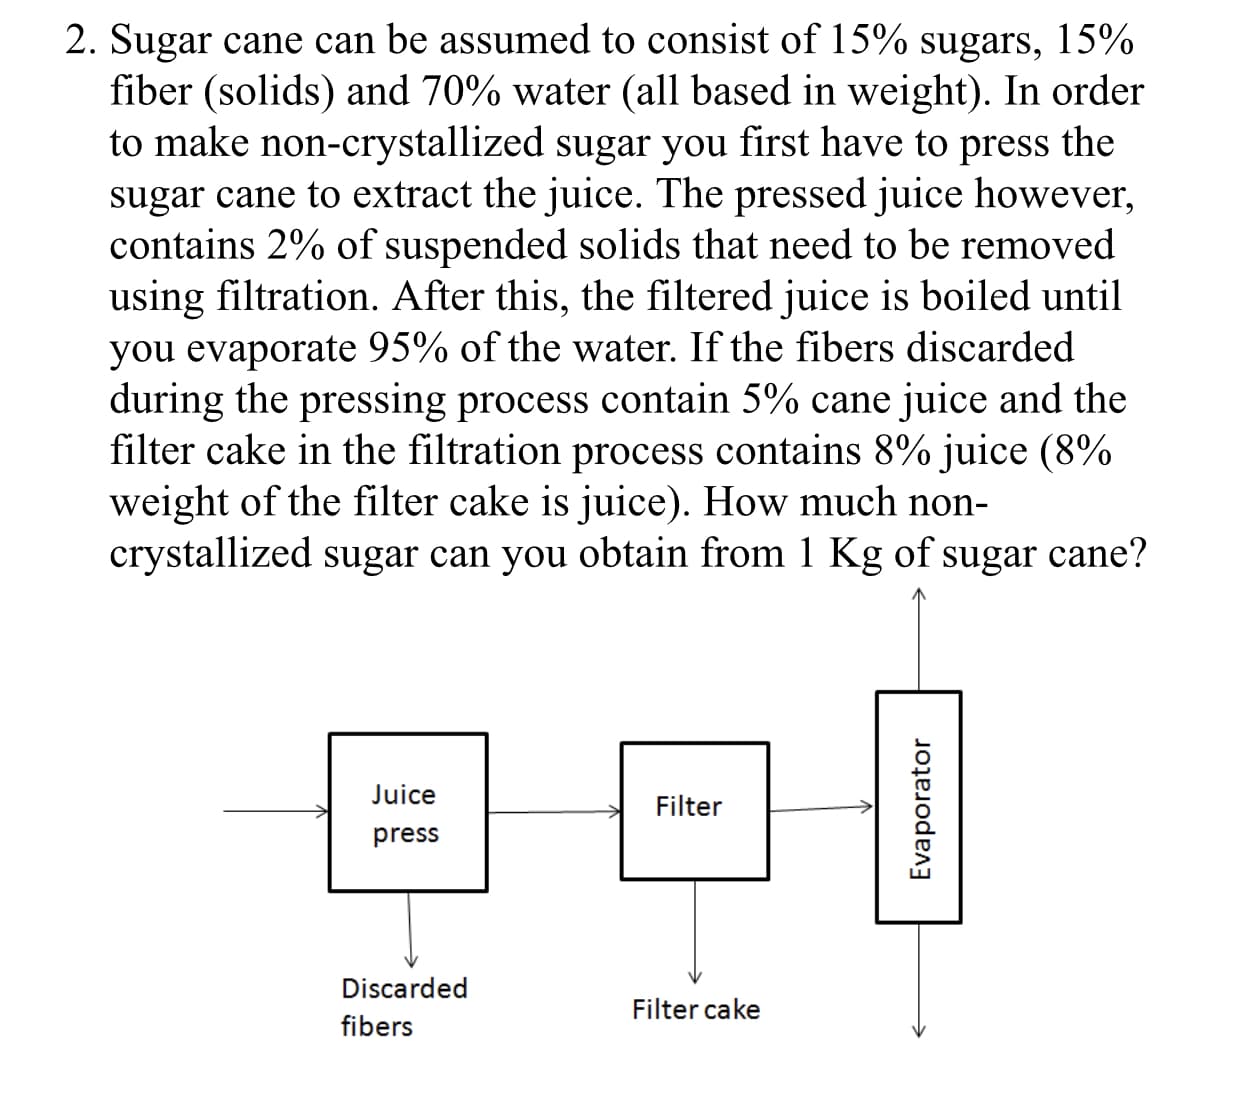 2. Sugar cane can be assumed to consist of 15% sugars, 15%
fiber (Solids) and 70% water (all based in weight). In order
to make non-crystallized sugar you first have to press the
sugar cane to extract the juice. The pressed juice however
contains 2% of suspended solids that need to be removed
using filtration. After this, the filtered juice is boiled until
you evaporate 95% of the water. If the fibers discarded
during the pressing process contain 5% cane juice and the
filter cake in the filtration process contains 8% juice(8%
weight of the filter cake is juice). How much non-
crystallized sugar can you obtain from 1 Kg of sugar cane?
uice
press
Filter
Discarded
fibers
Filter cake
